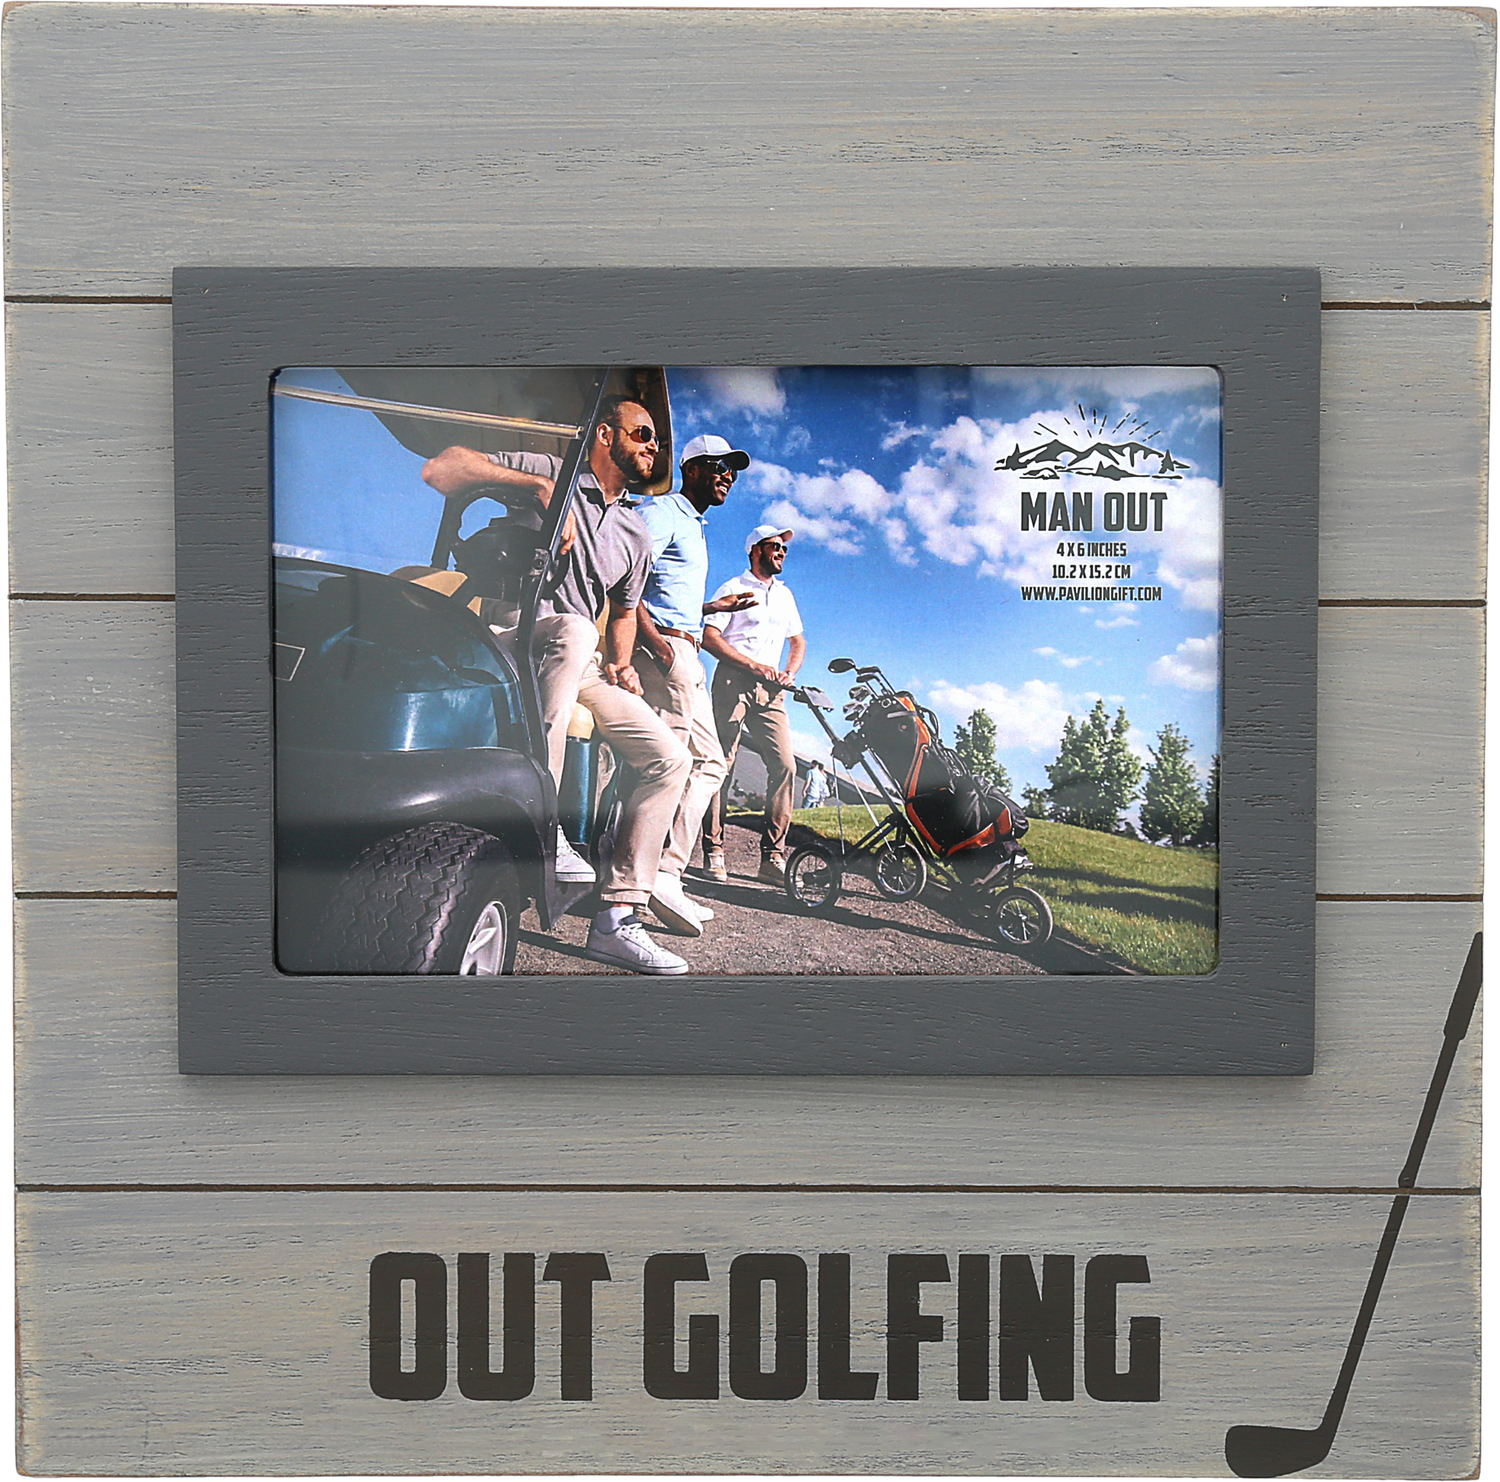 Golfing by Man Out - Golfing - 8.75" Frame
(Holds 6" x 4" Photo)